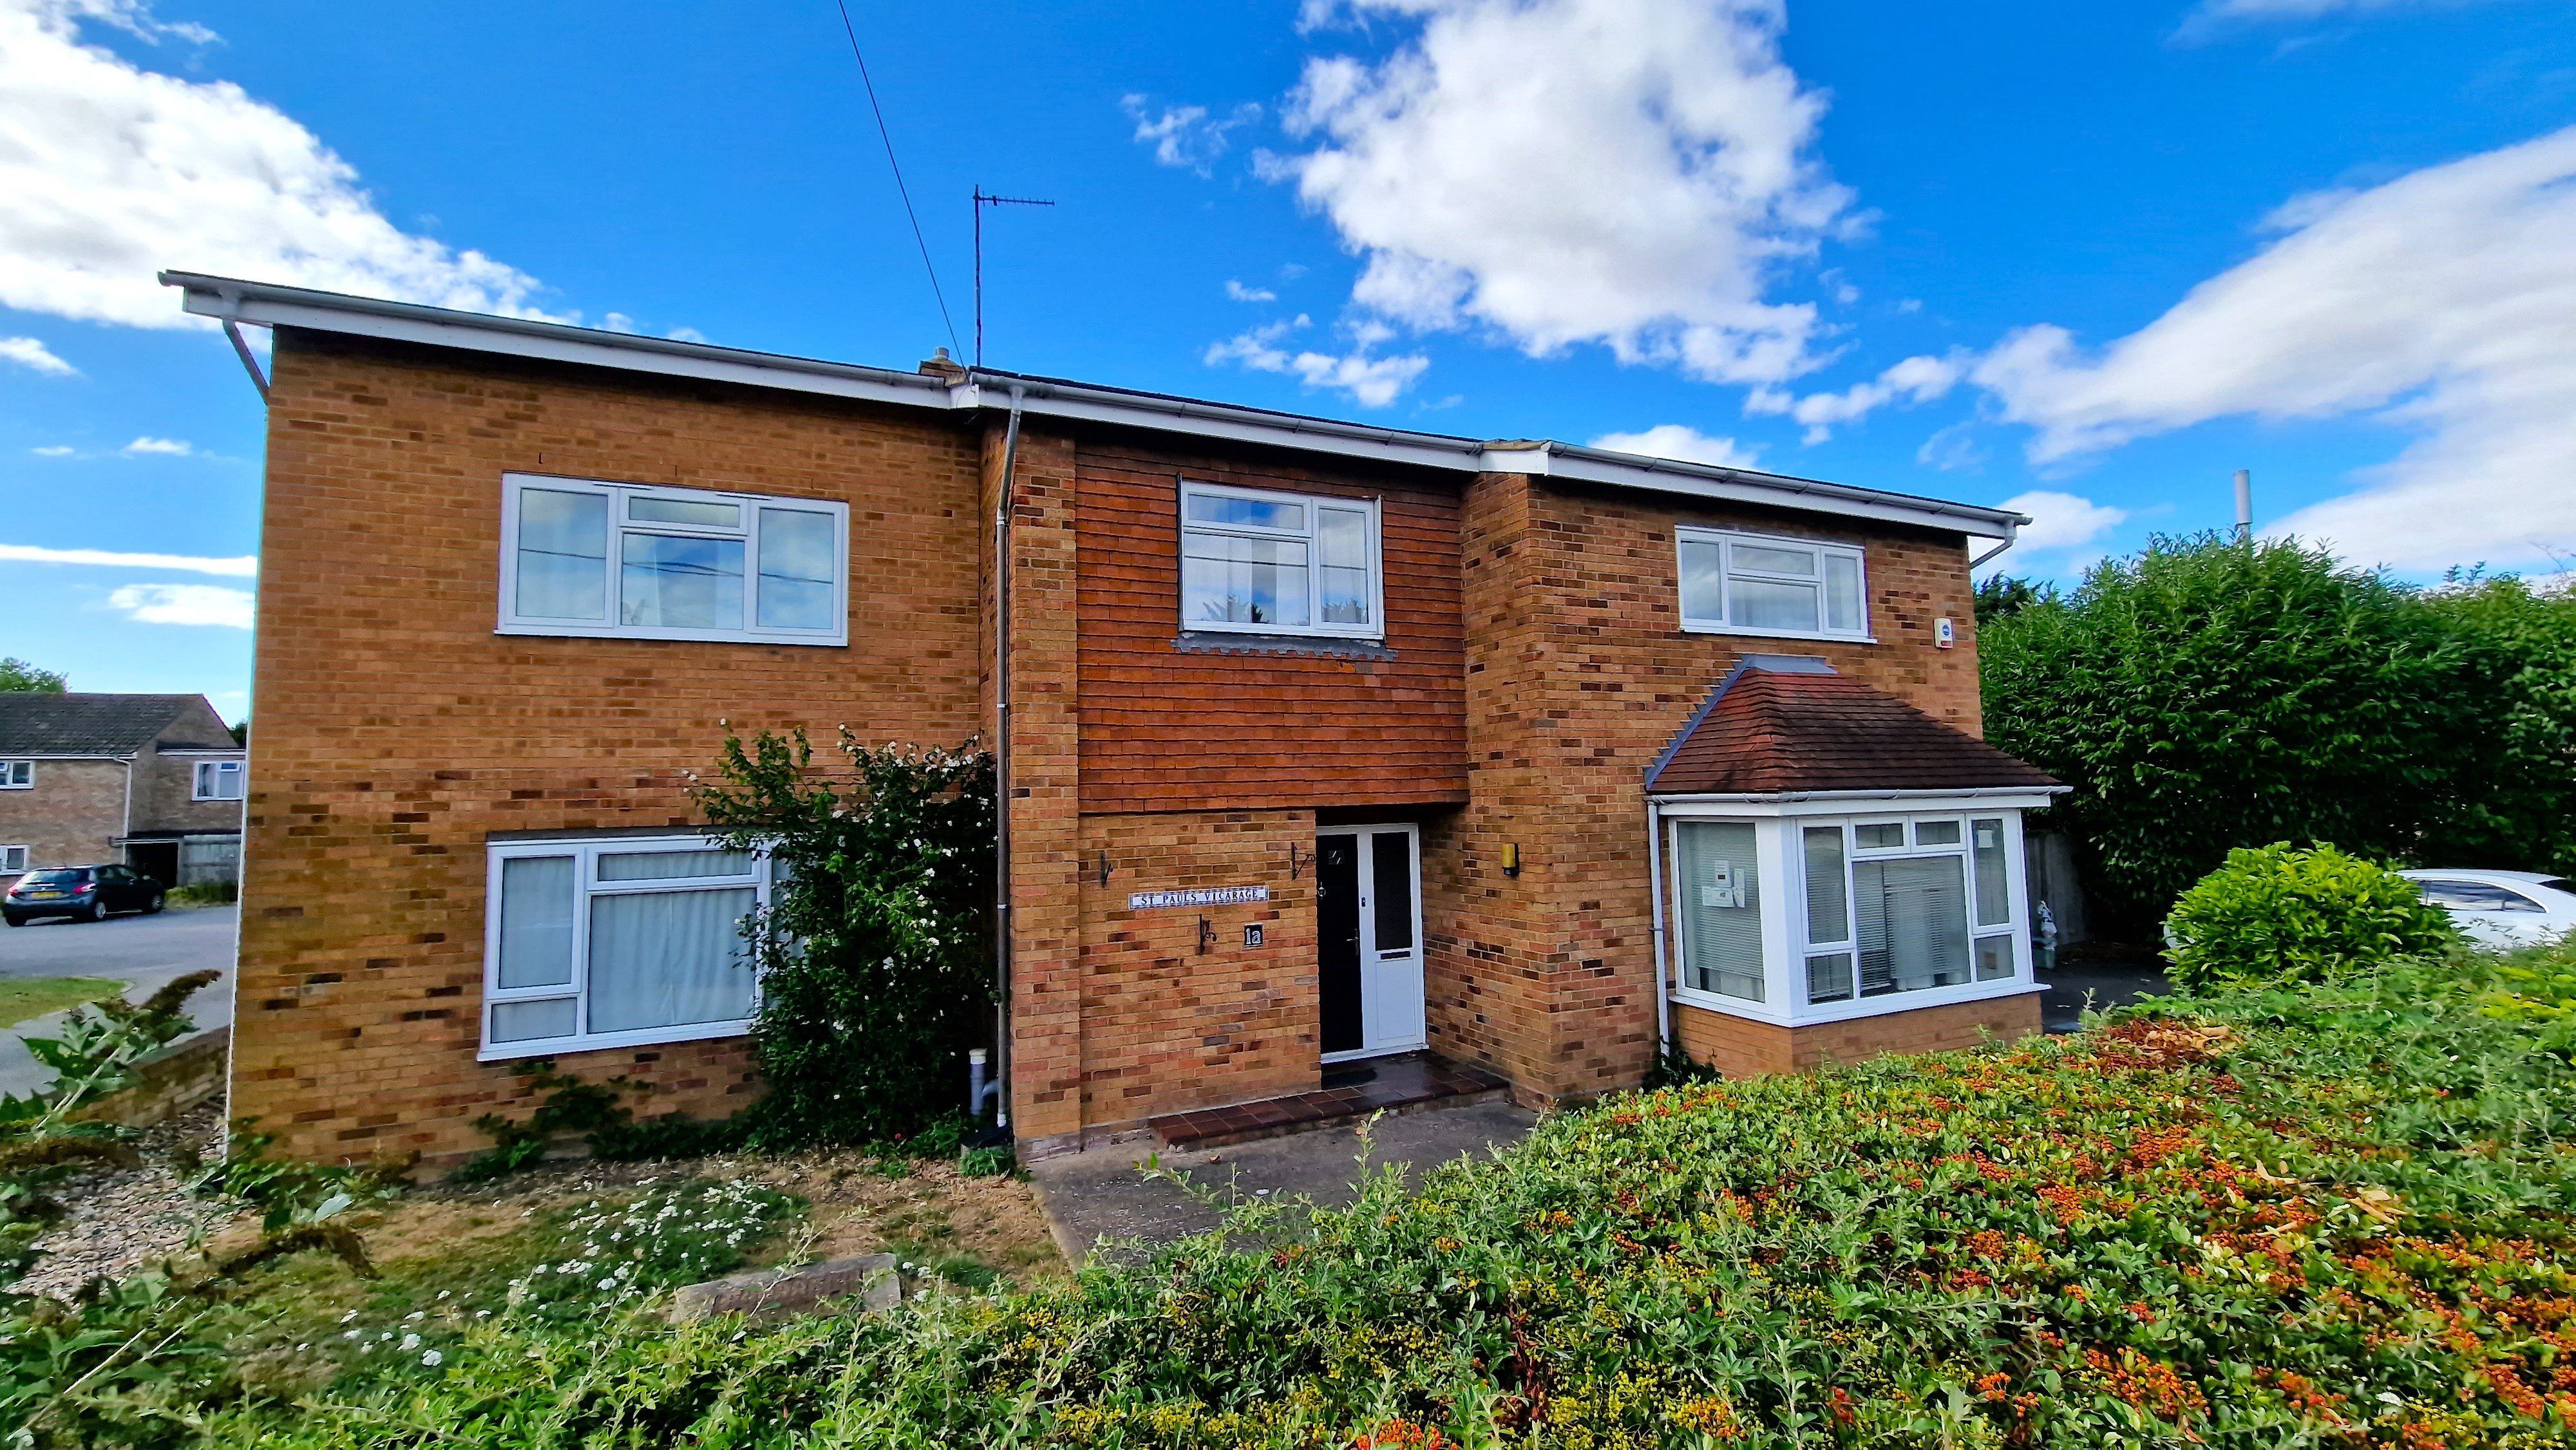 1 bed detached house to rent in Hay Lane South, Braintree, CM7 